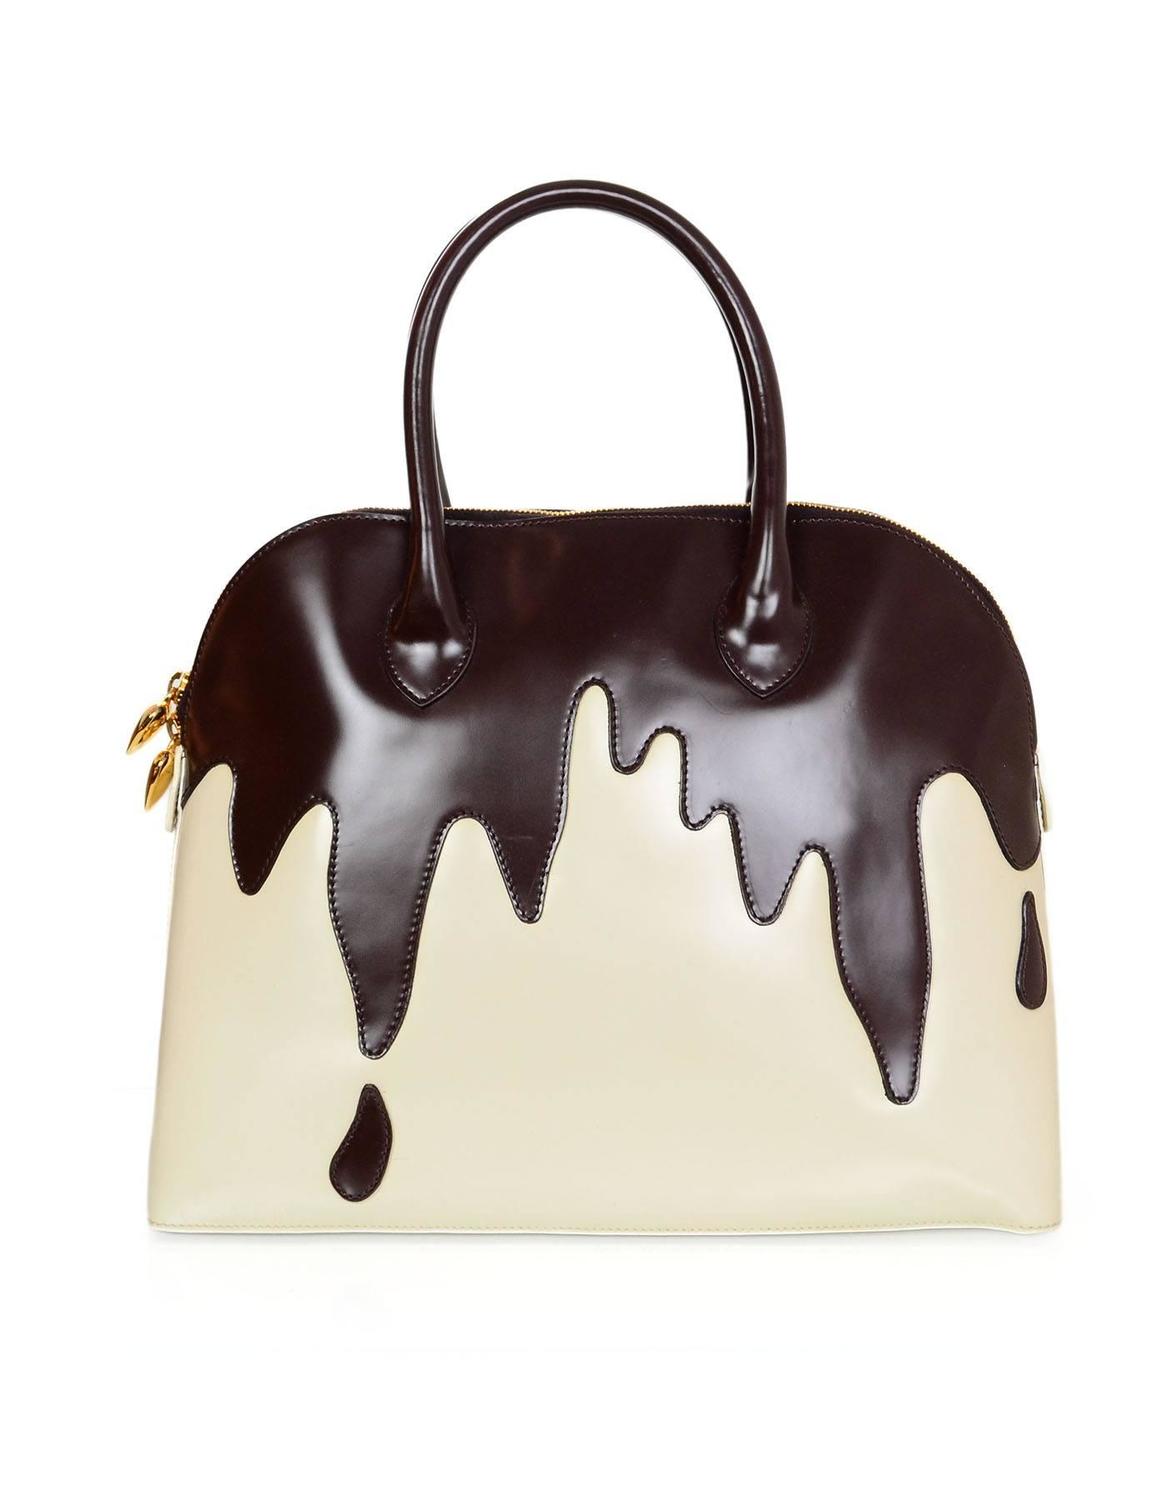 Moschino Vintage Dripping Chocolate Handle Bag For Sale at 1stdibs